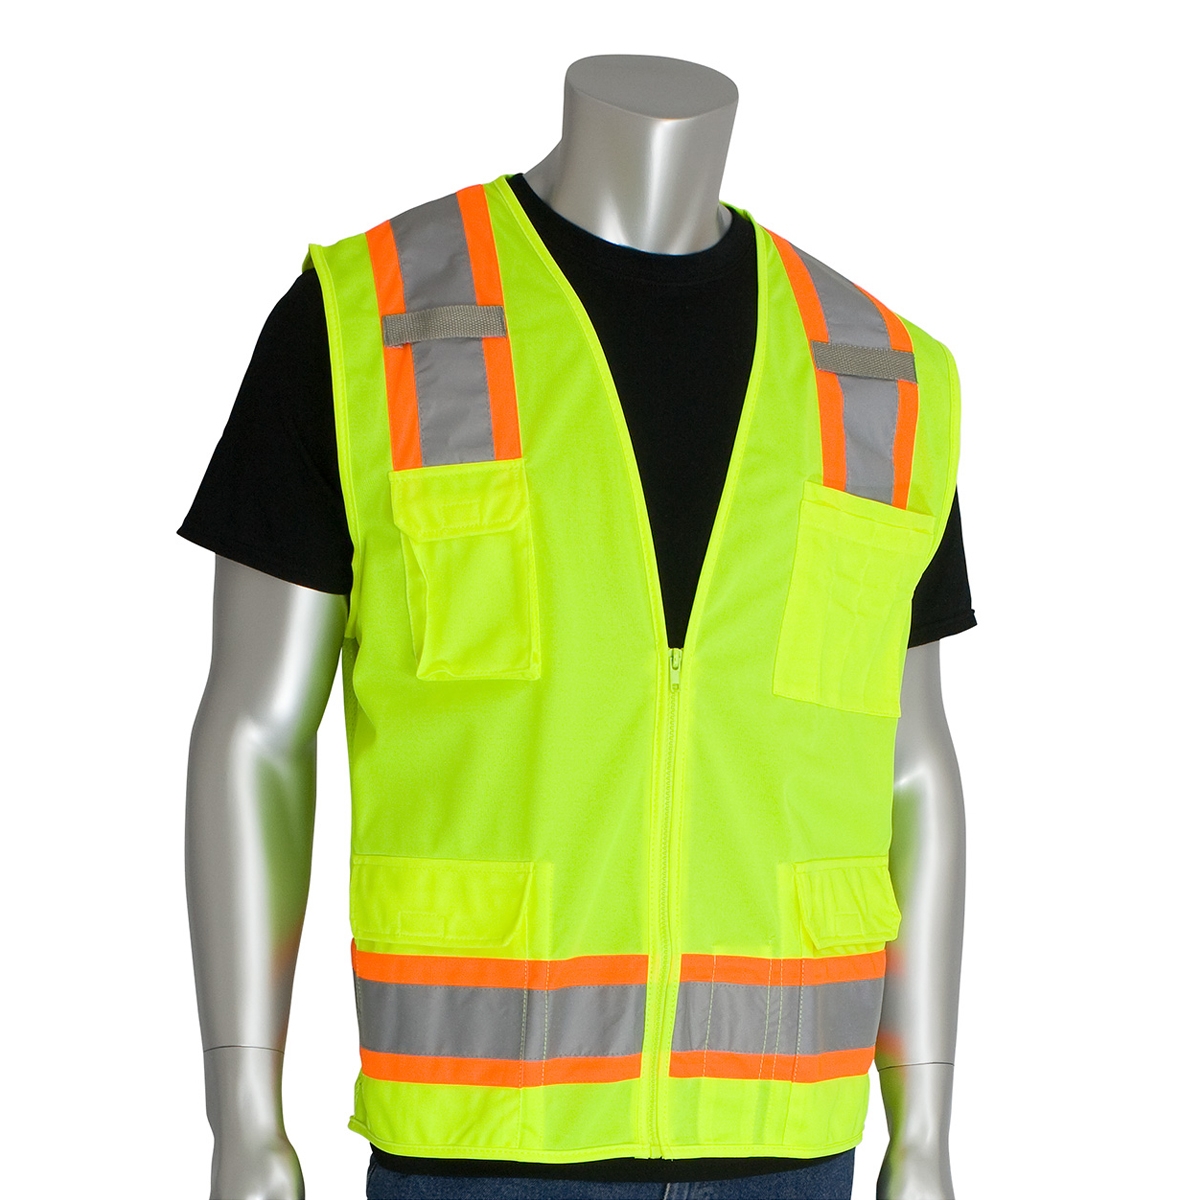 PIP 302-0500 Type R Class Two-Tone Surveyor Safety Vest with Six Pockets  Yellow/Lime Full Source